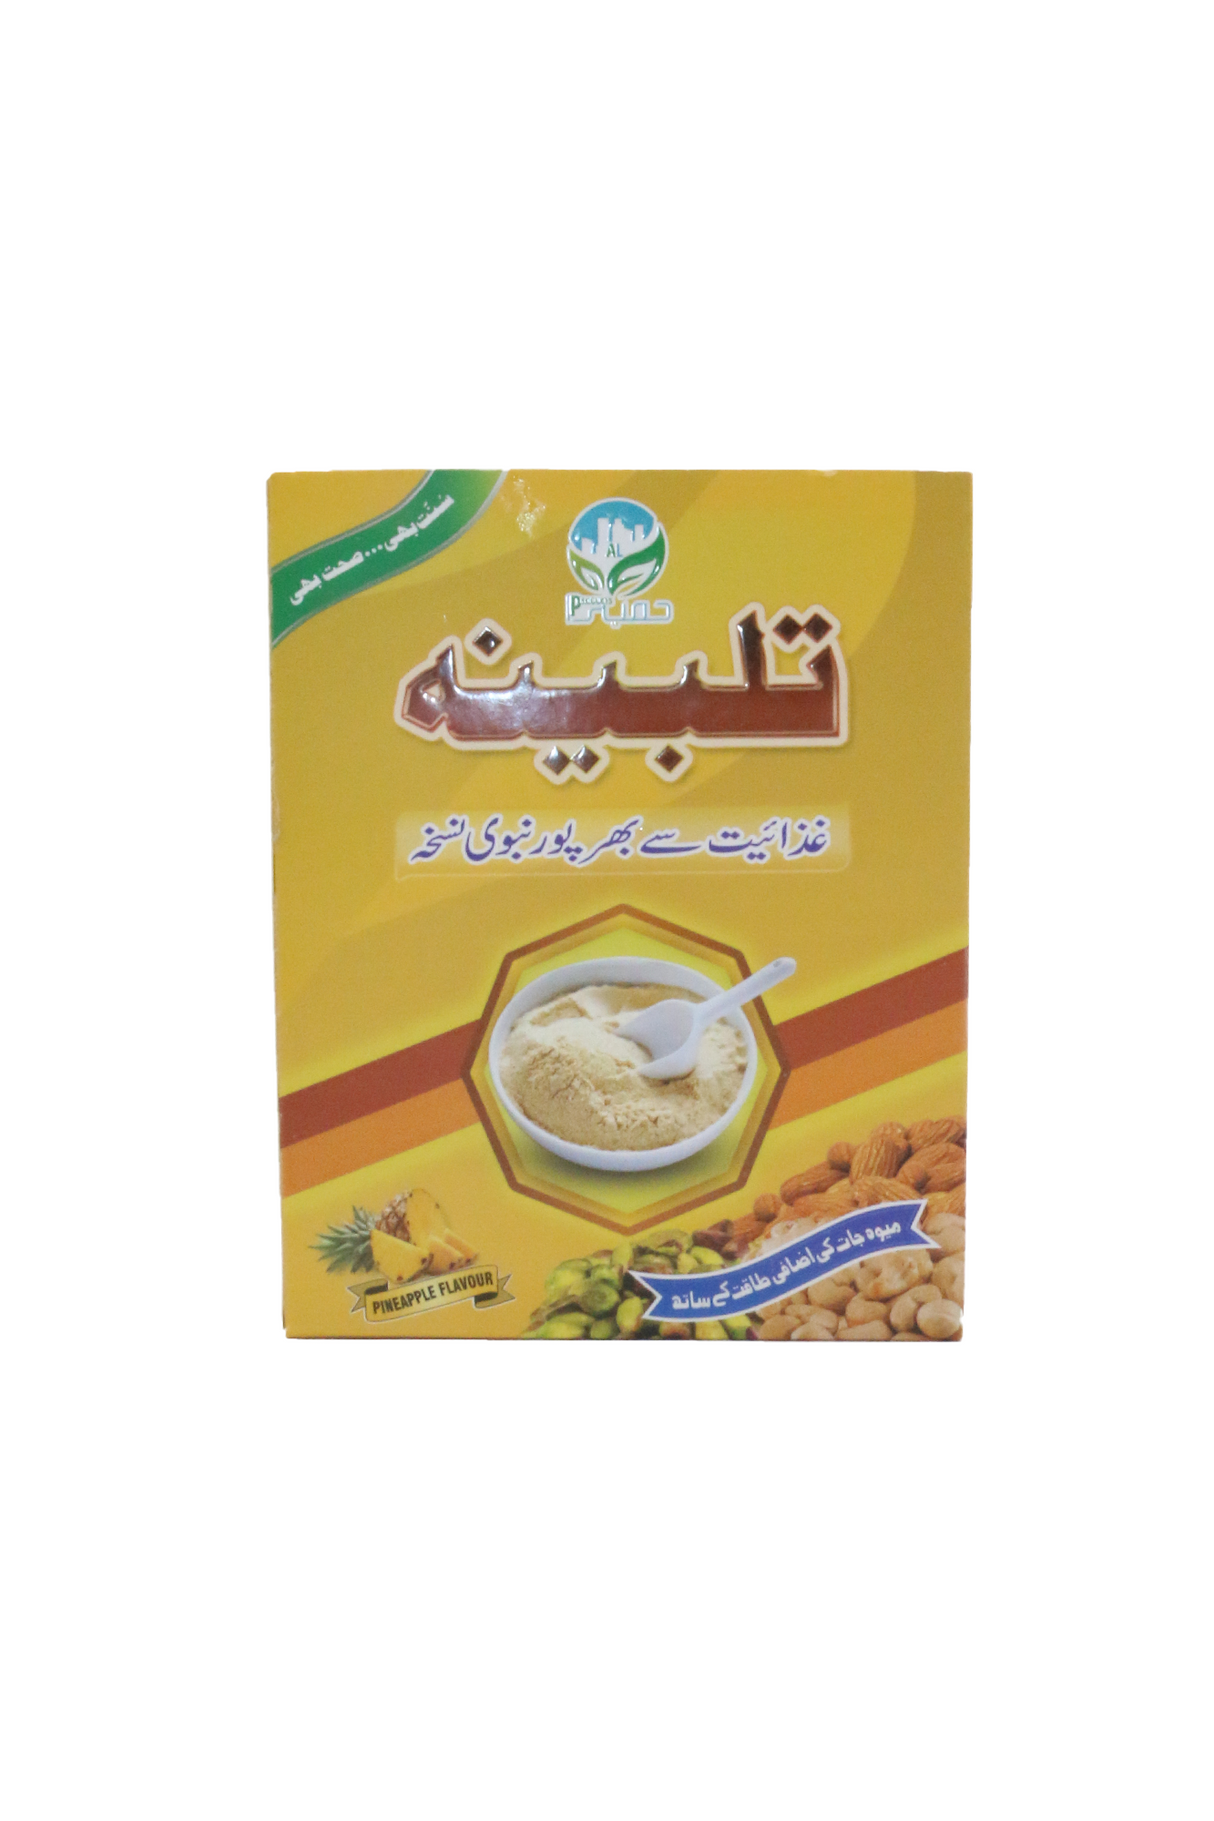 talbina cereal pineapple flavour 200g